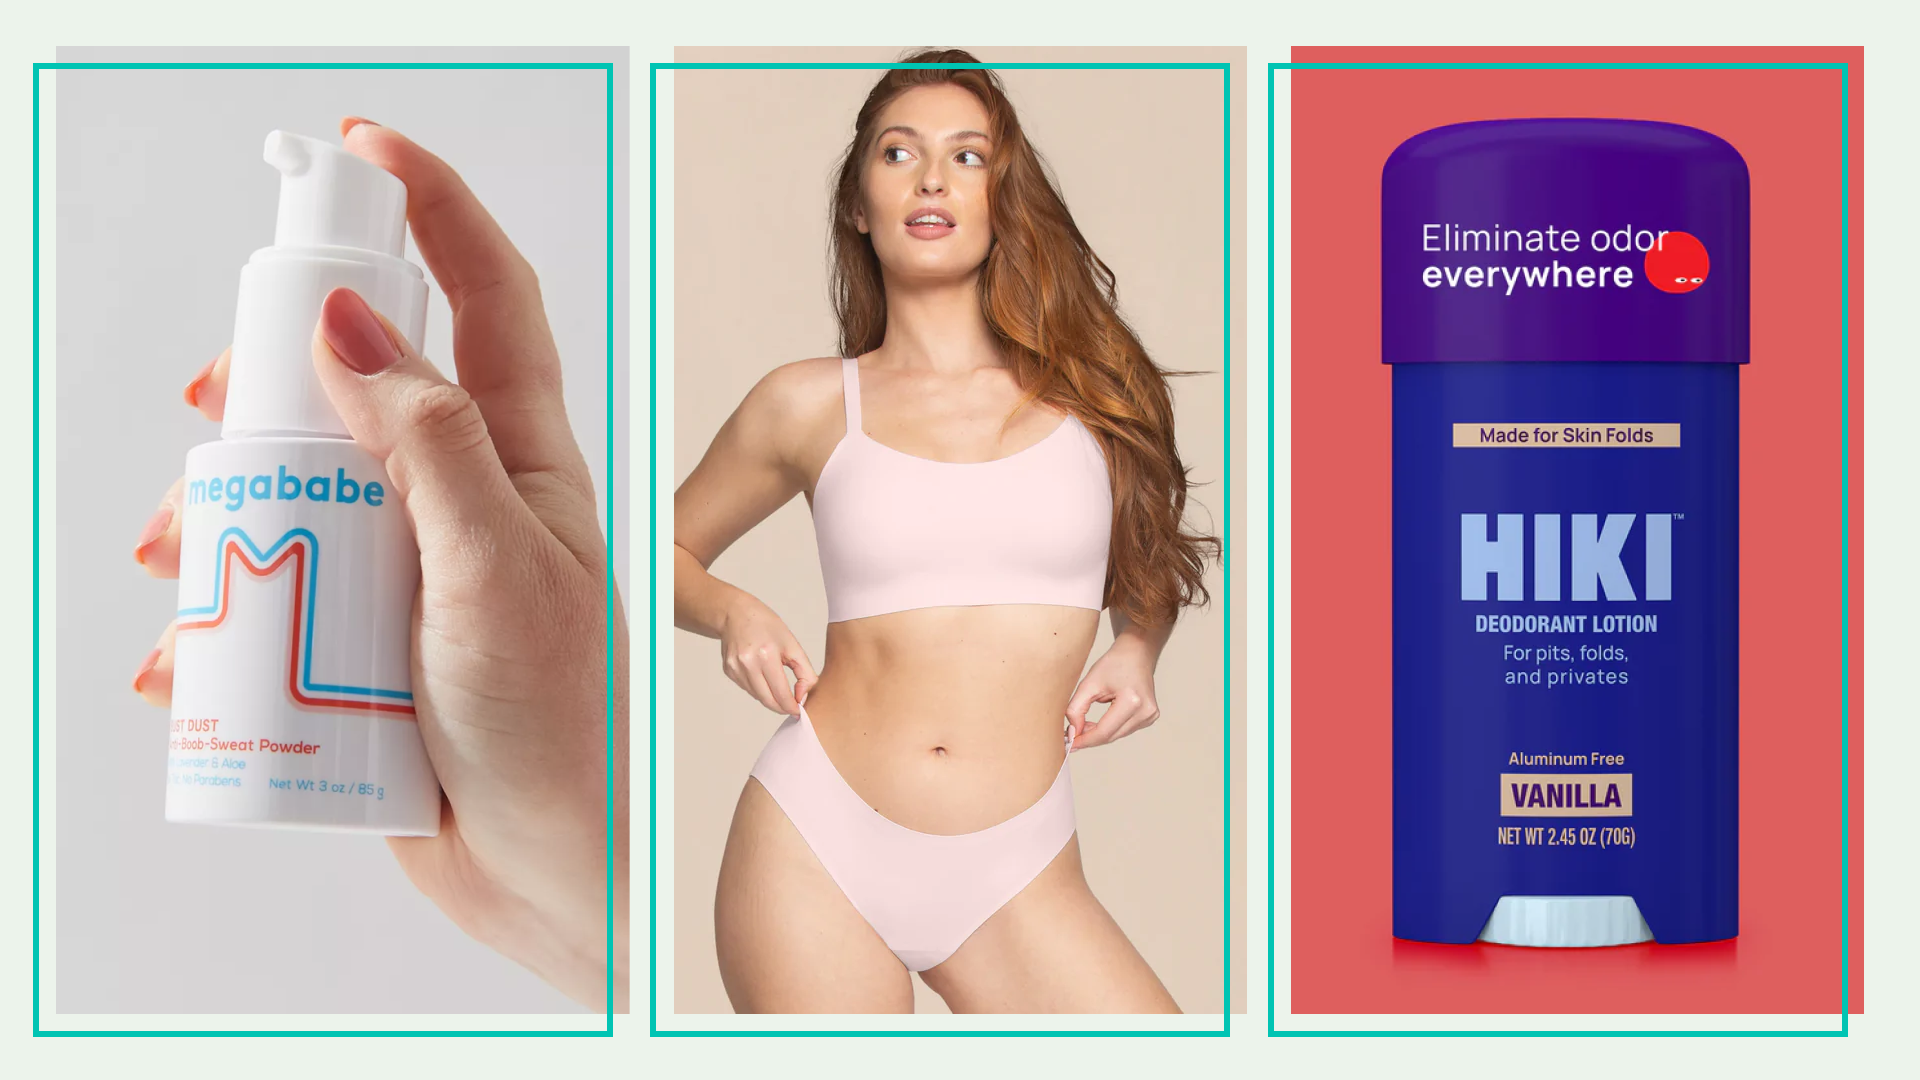 Sweaty breasts? These products could help keep under boob sweat at